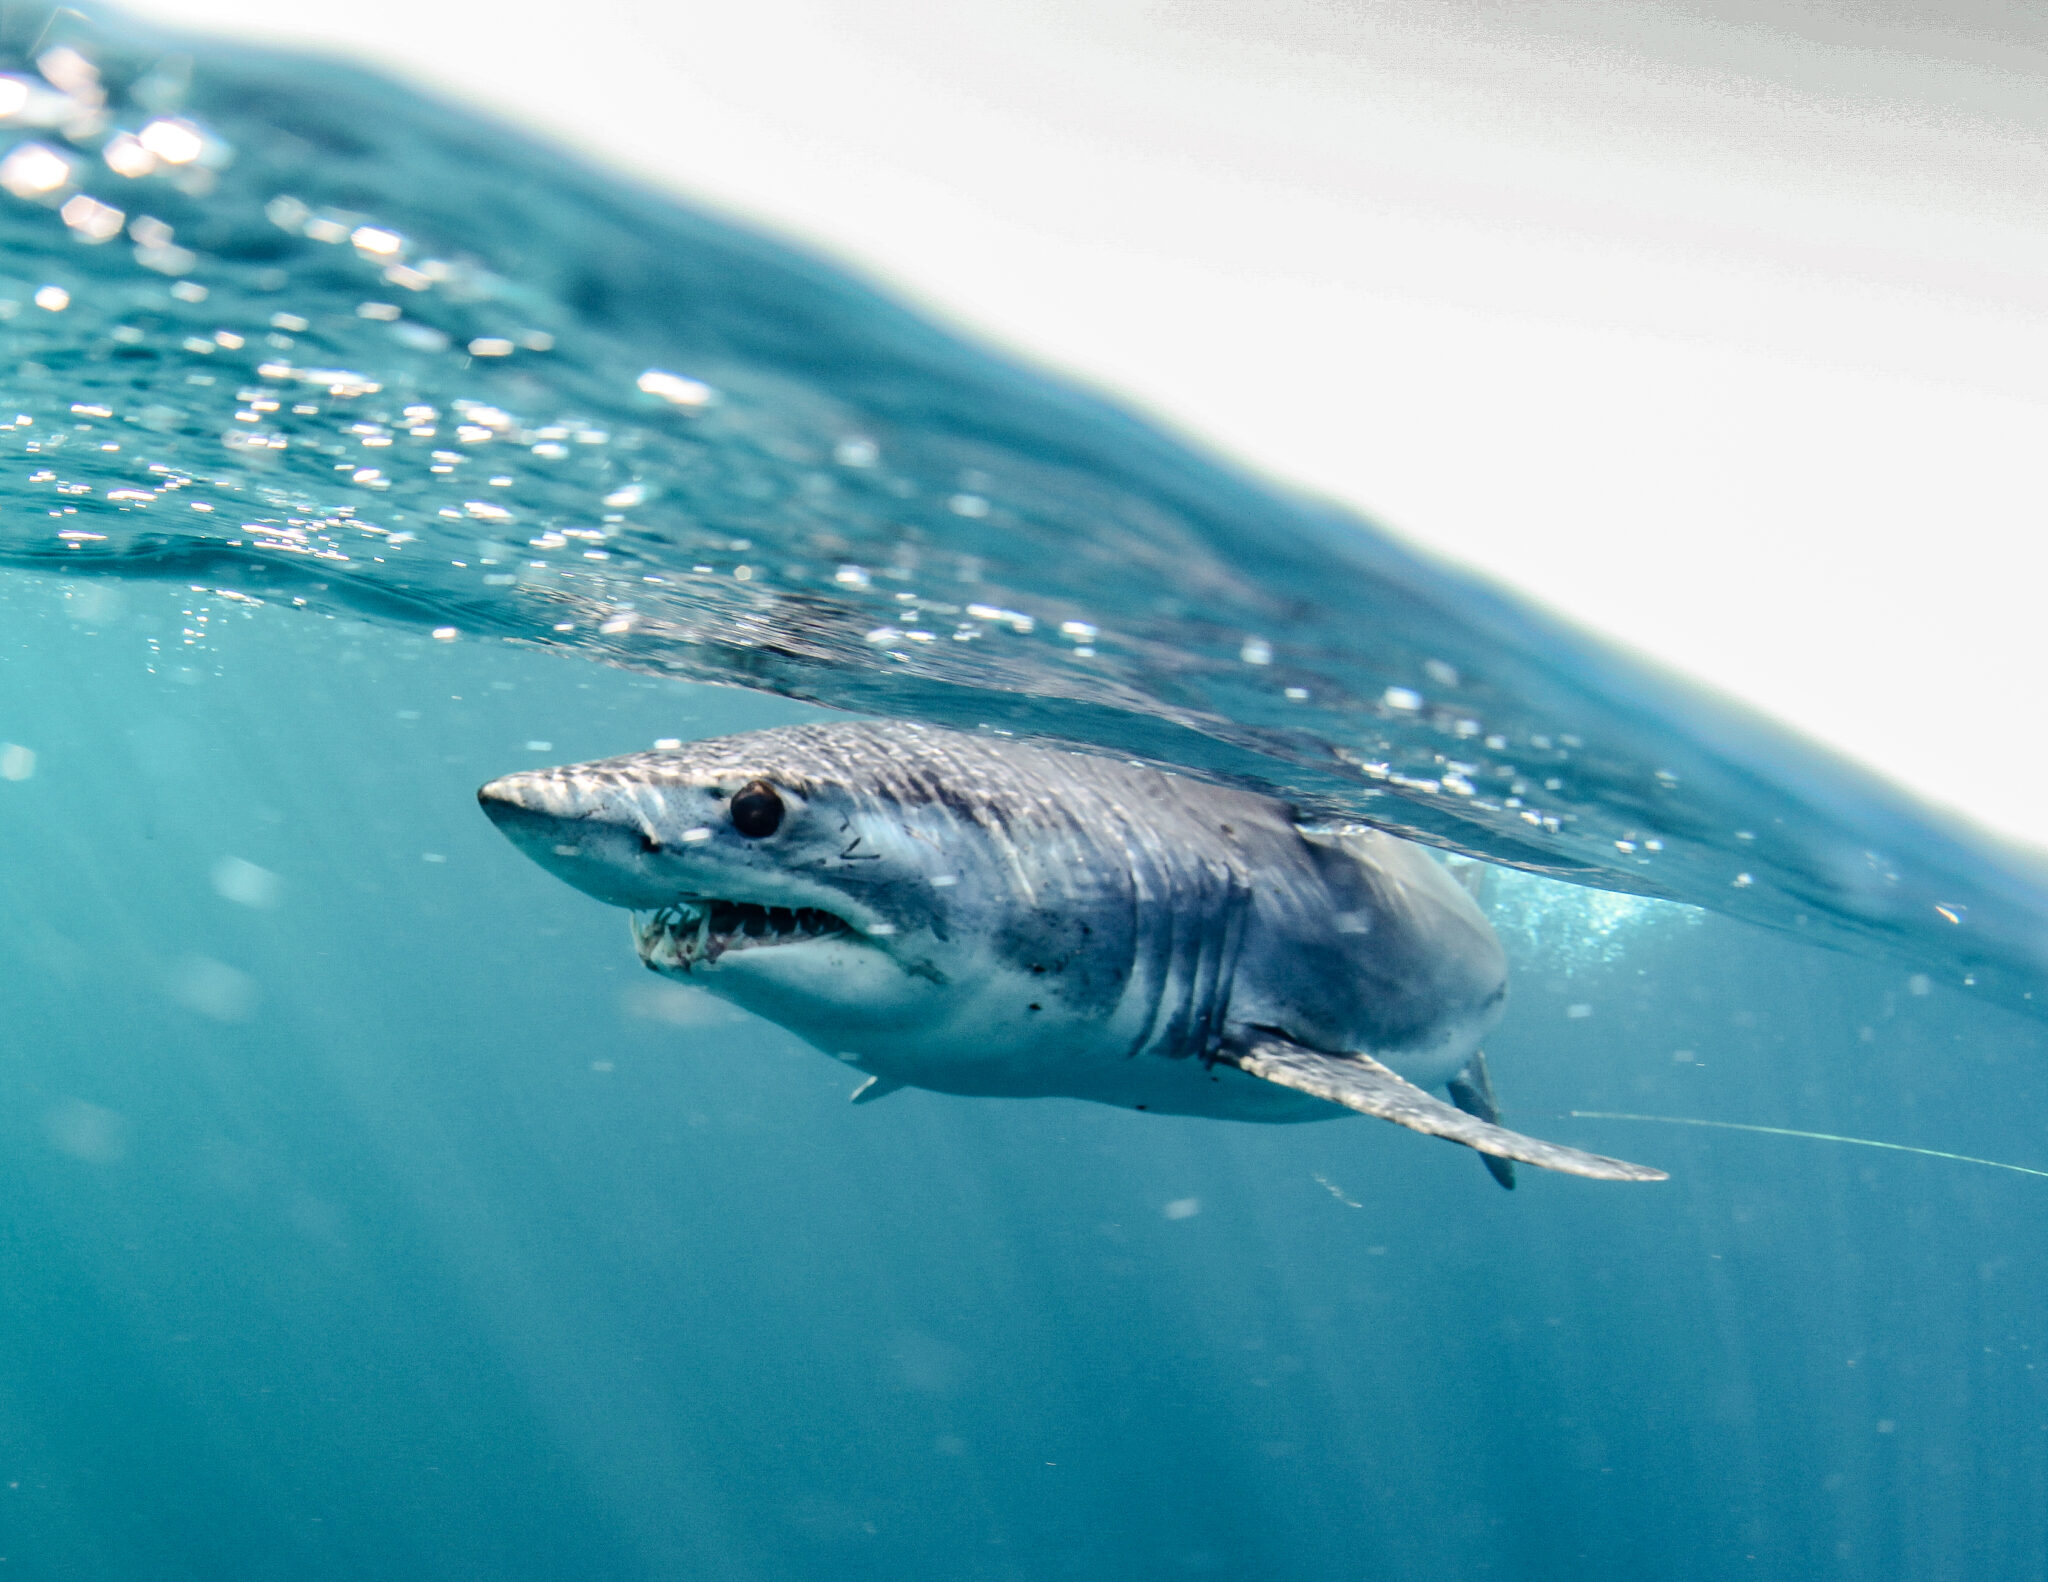 A shortfin mako shark swimming beneath the surface of the ocean and one reason why shark diving in California is so popular